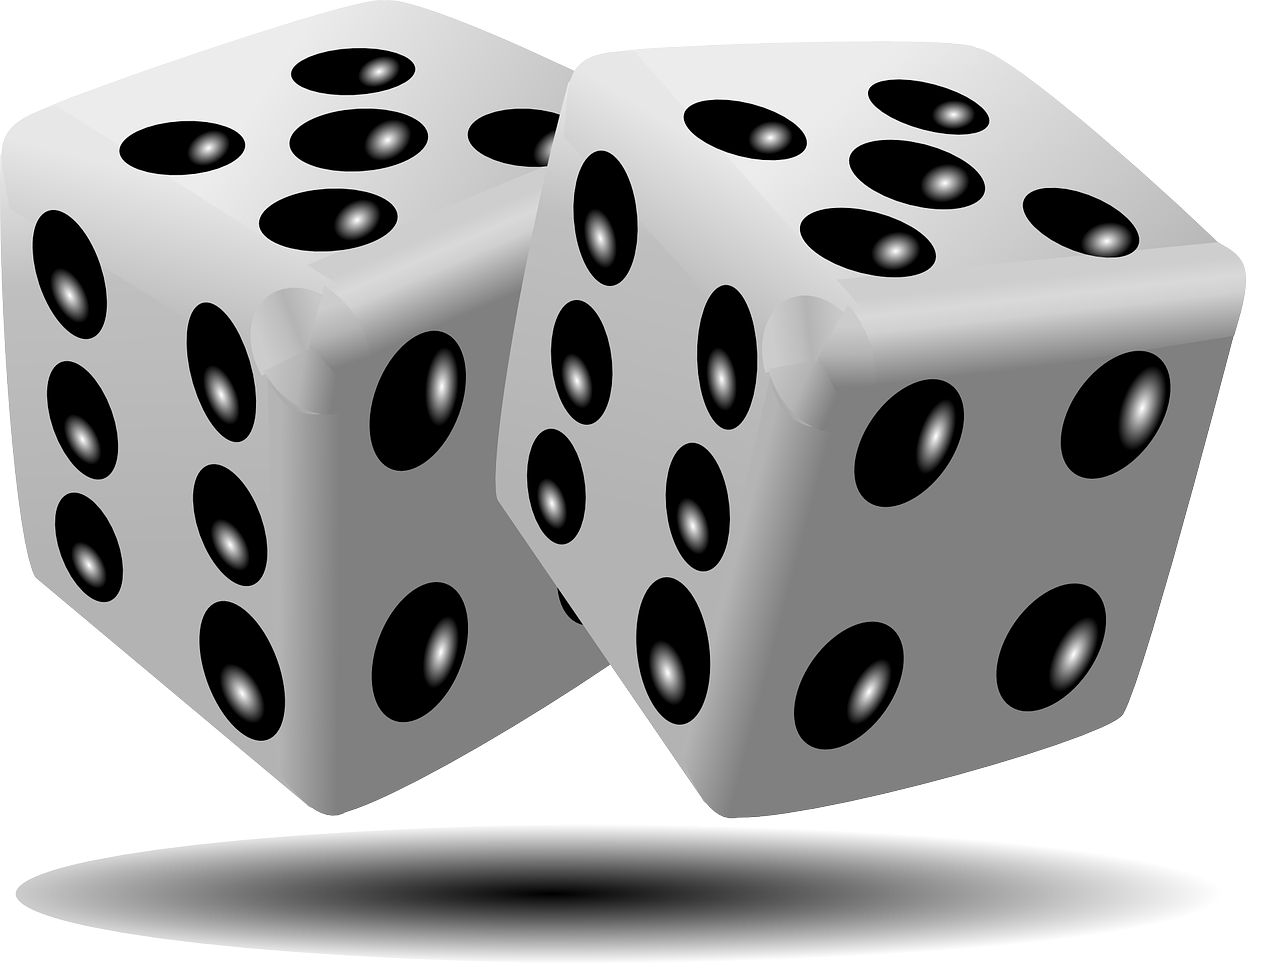 games clipart dice